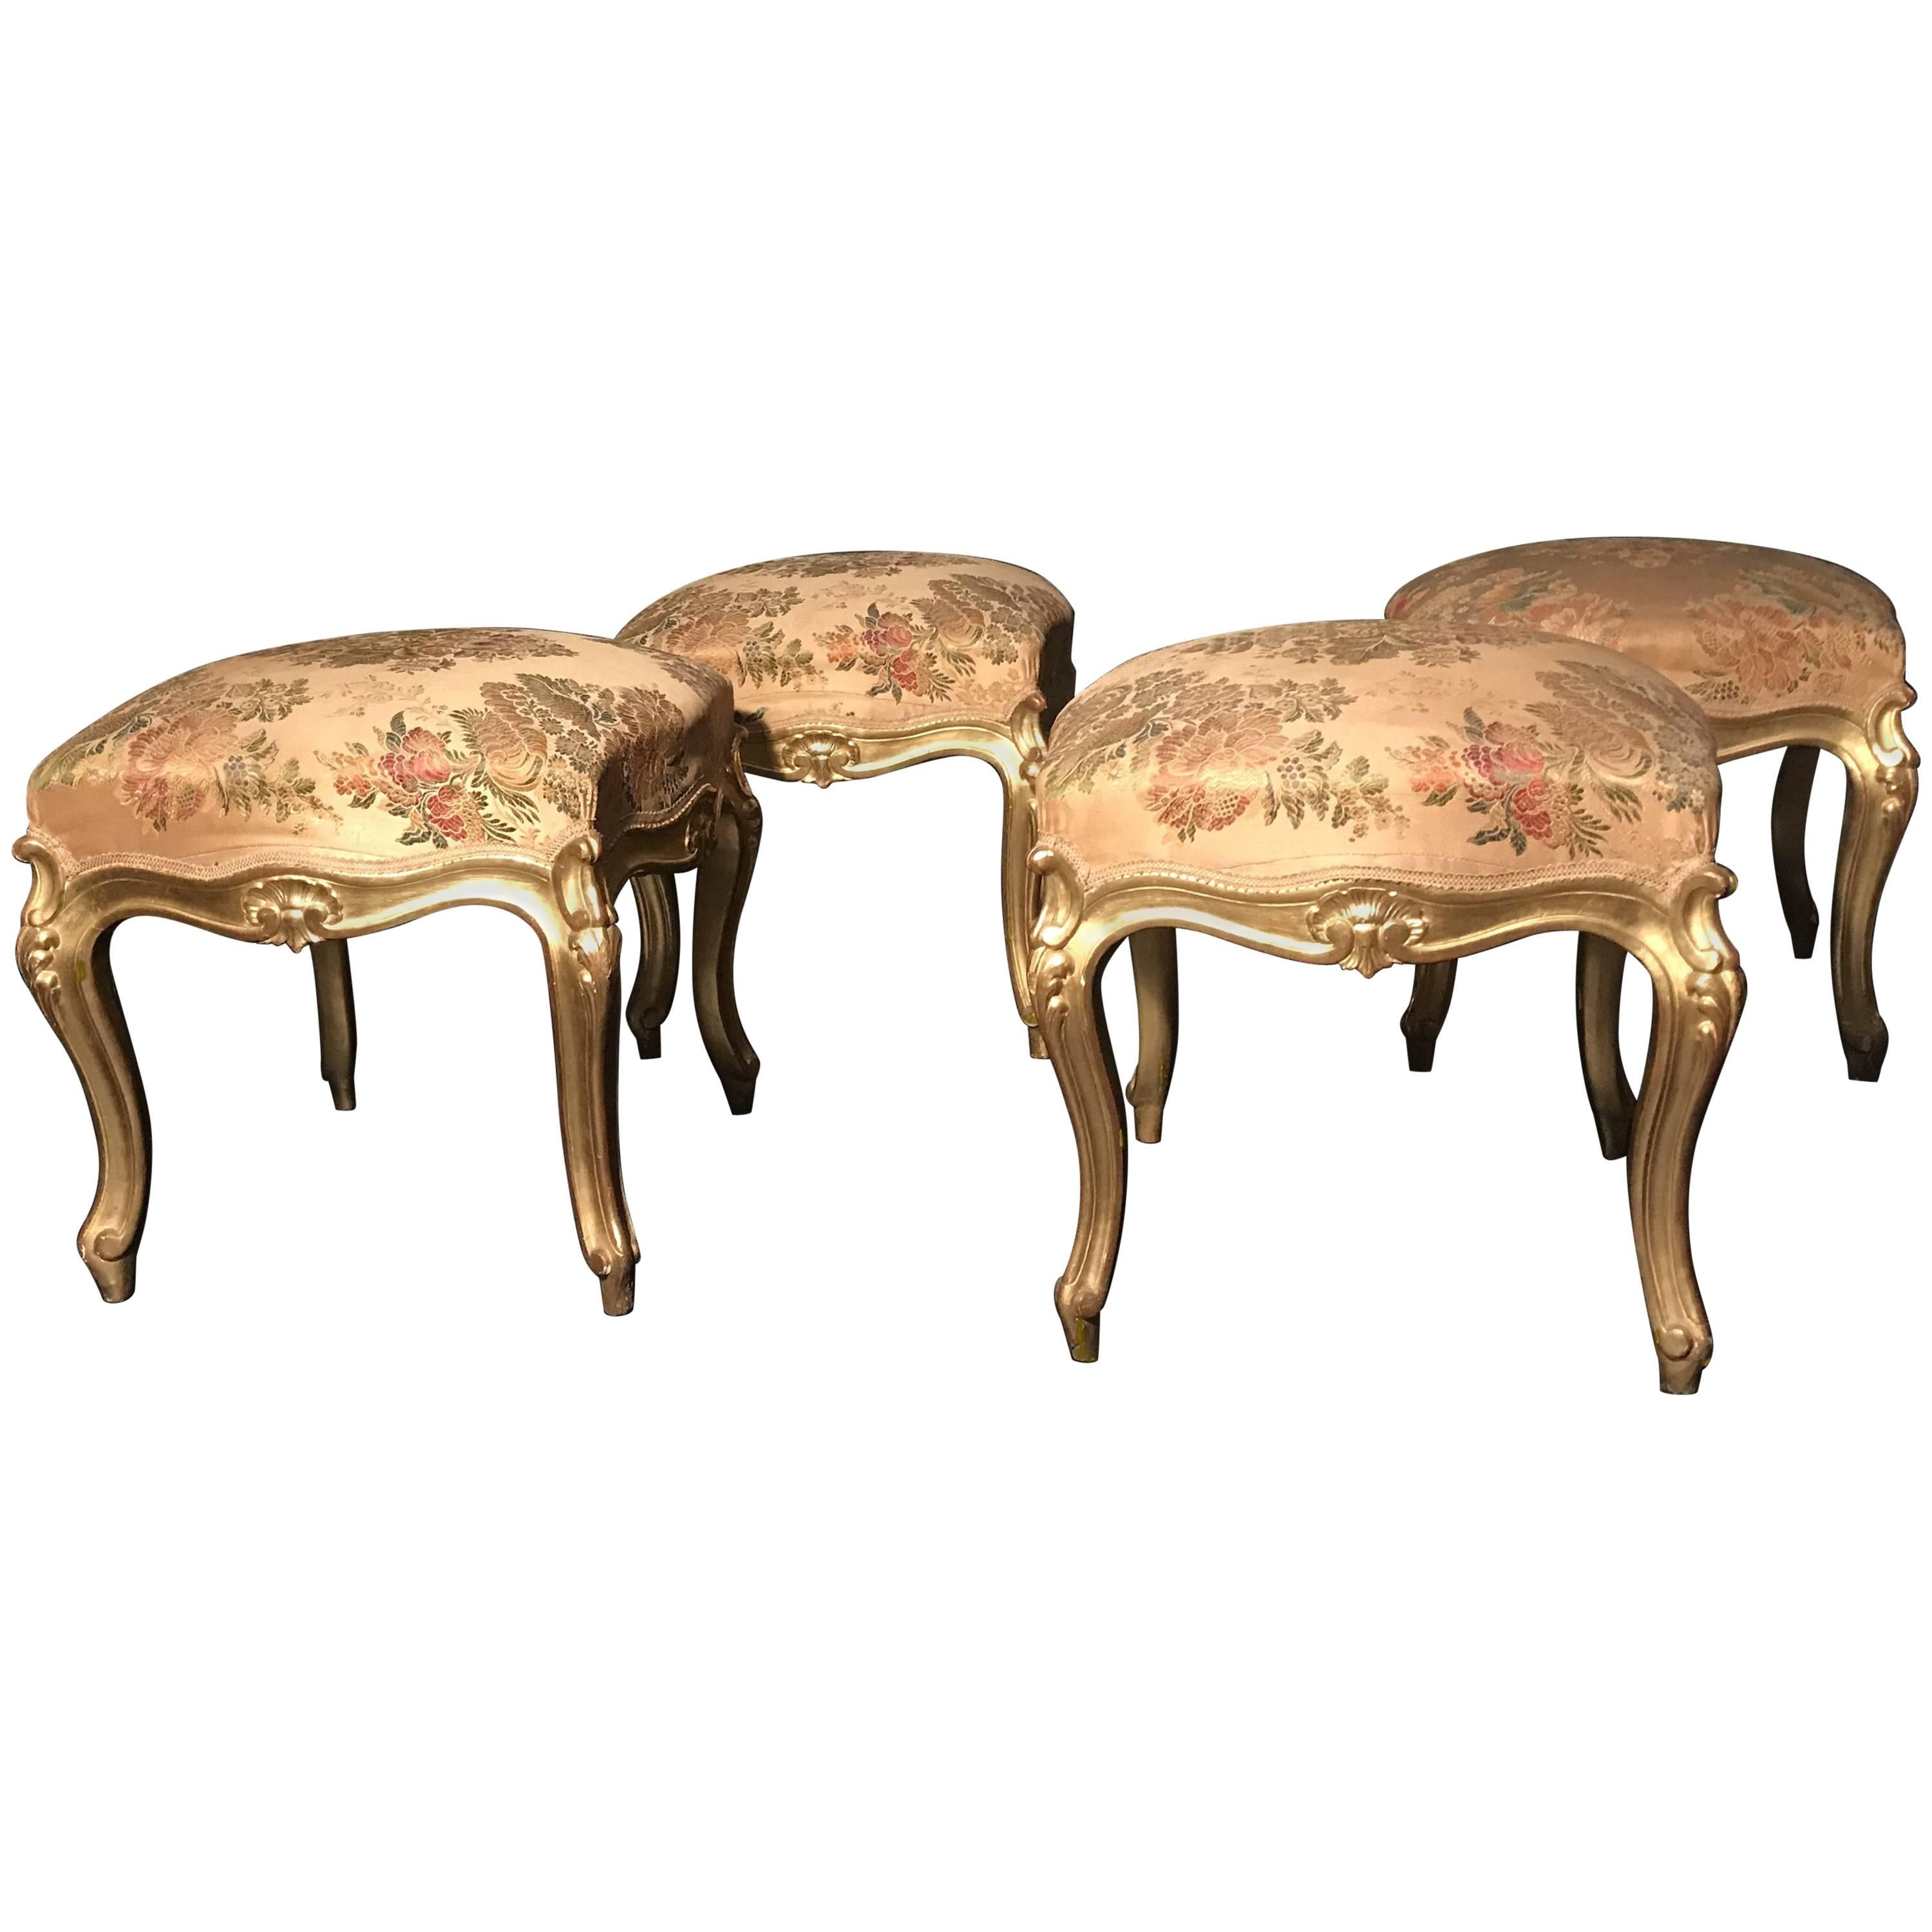 Rare Set of Four Giltwood Stools, Italy, 19th Century For Sale